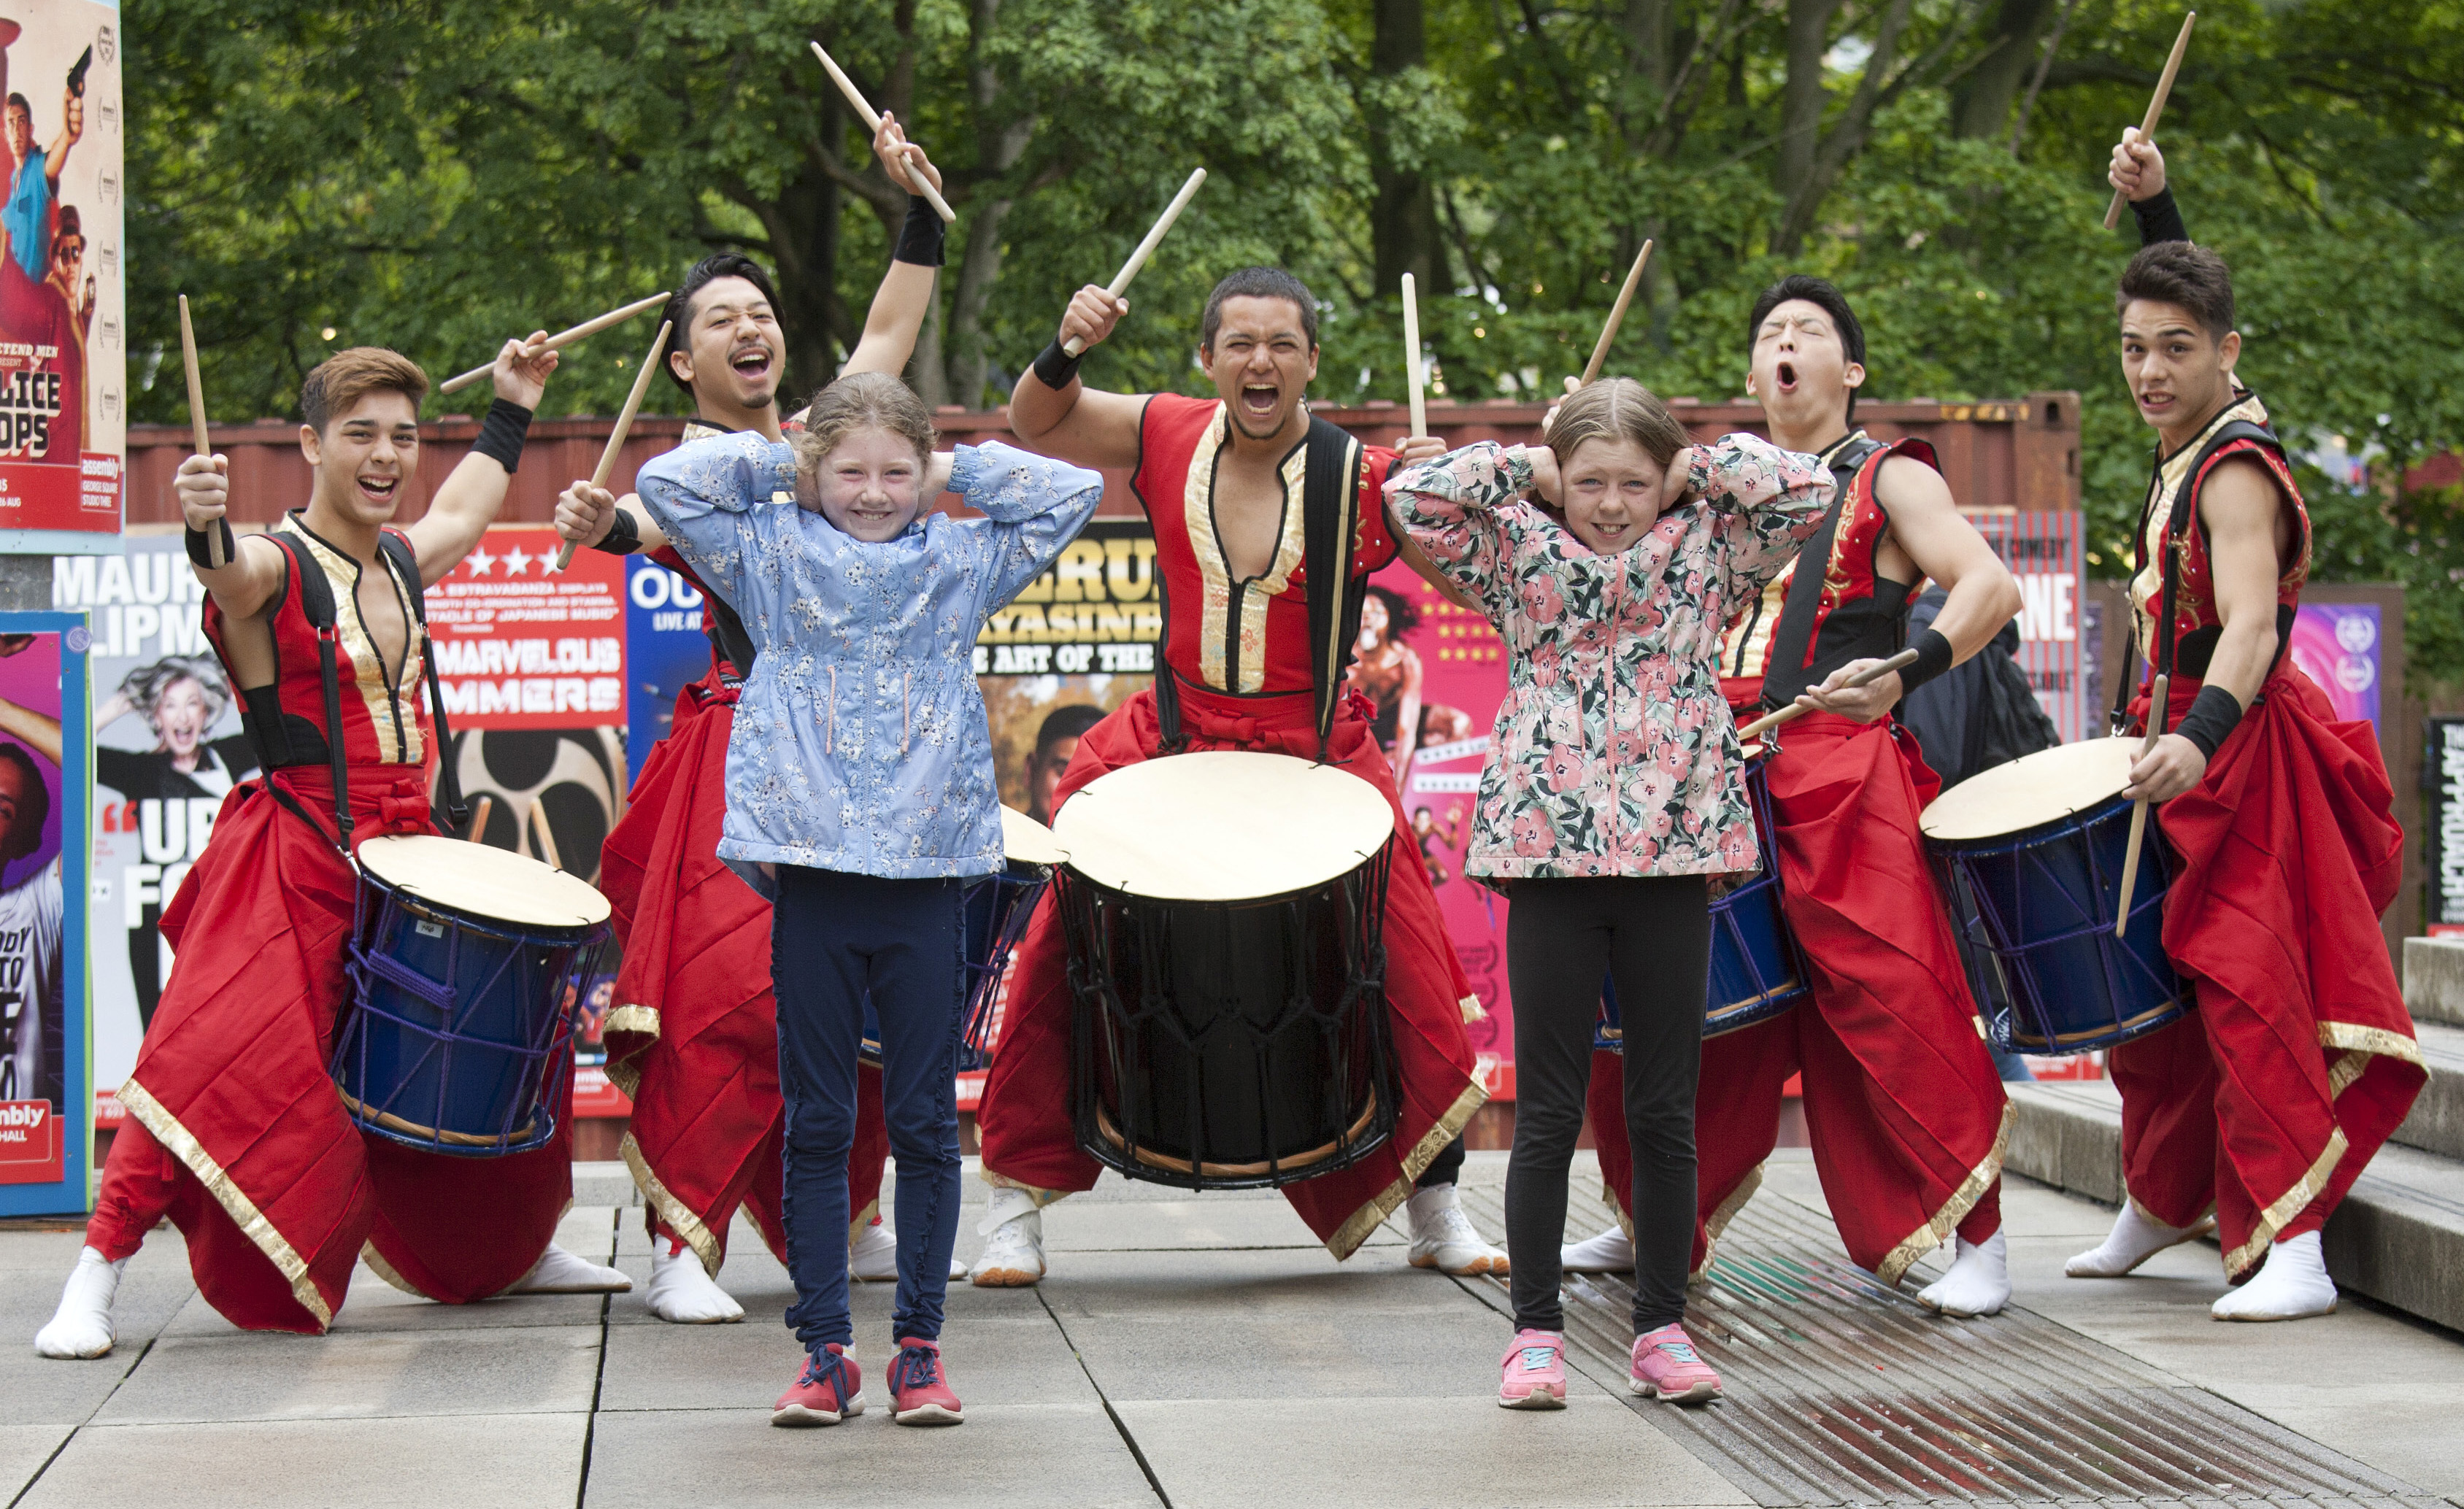 Emily and Holly Chalmers from Musselburgh cover their ears as Japan Marvelous Drummers perform at Edinburgh Festival Fringe (Alistair Linford)